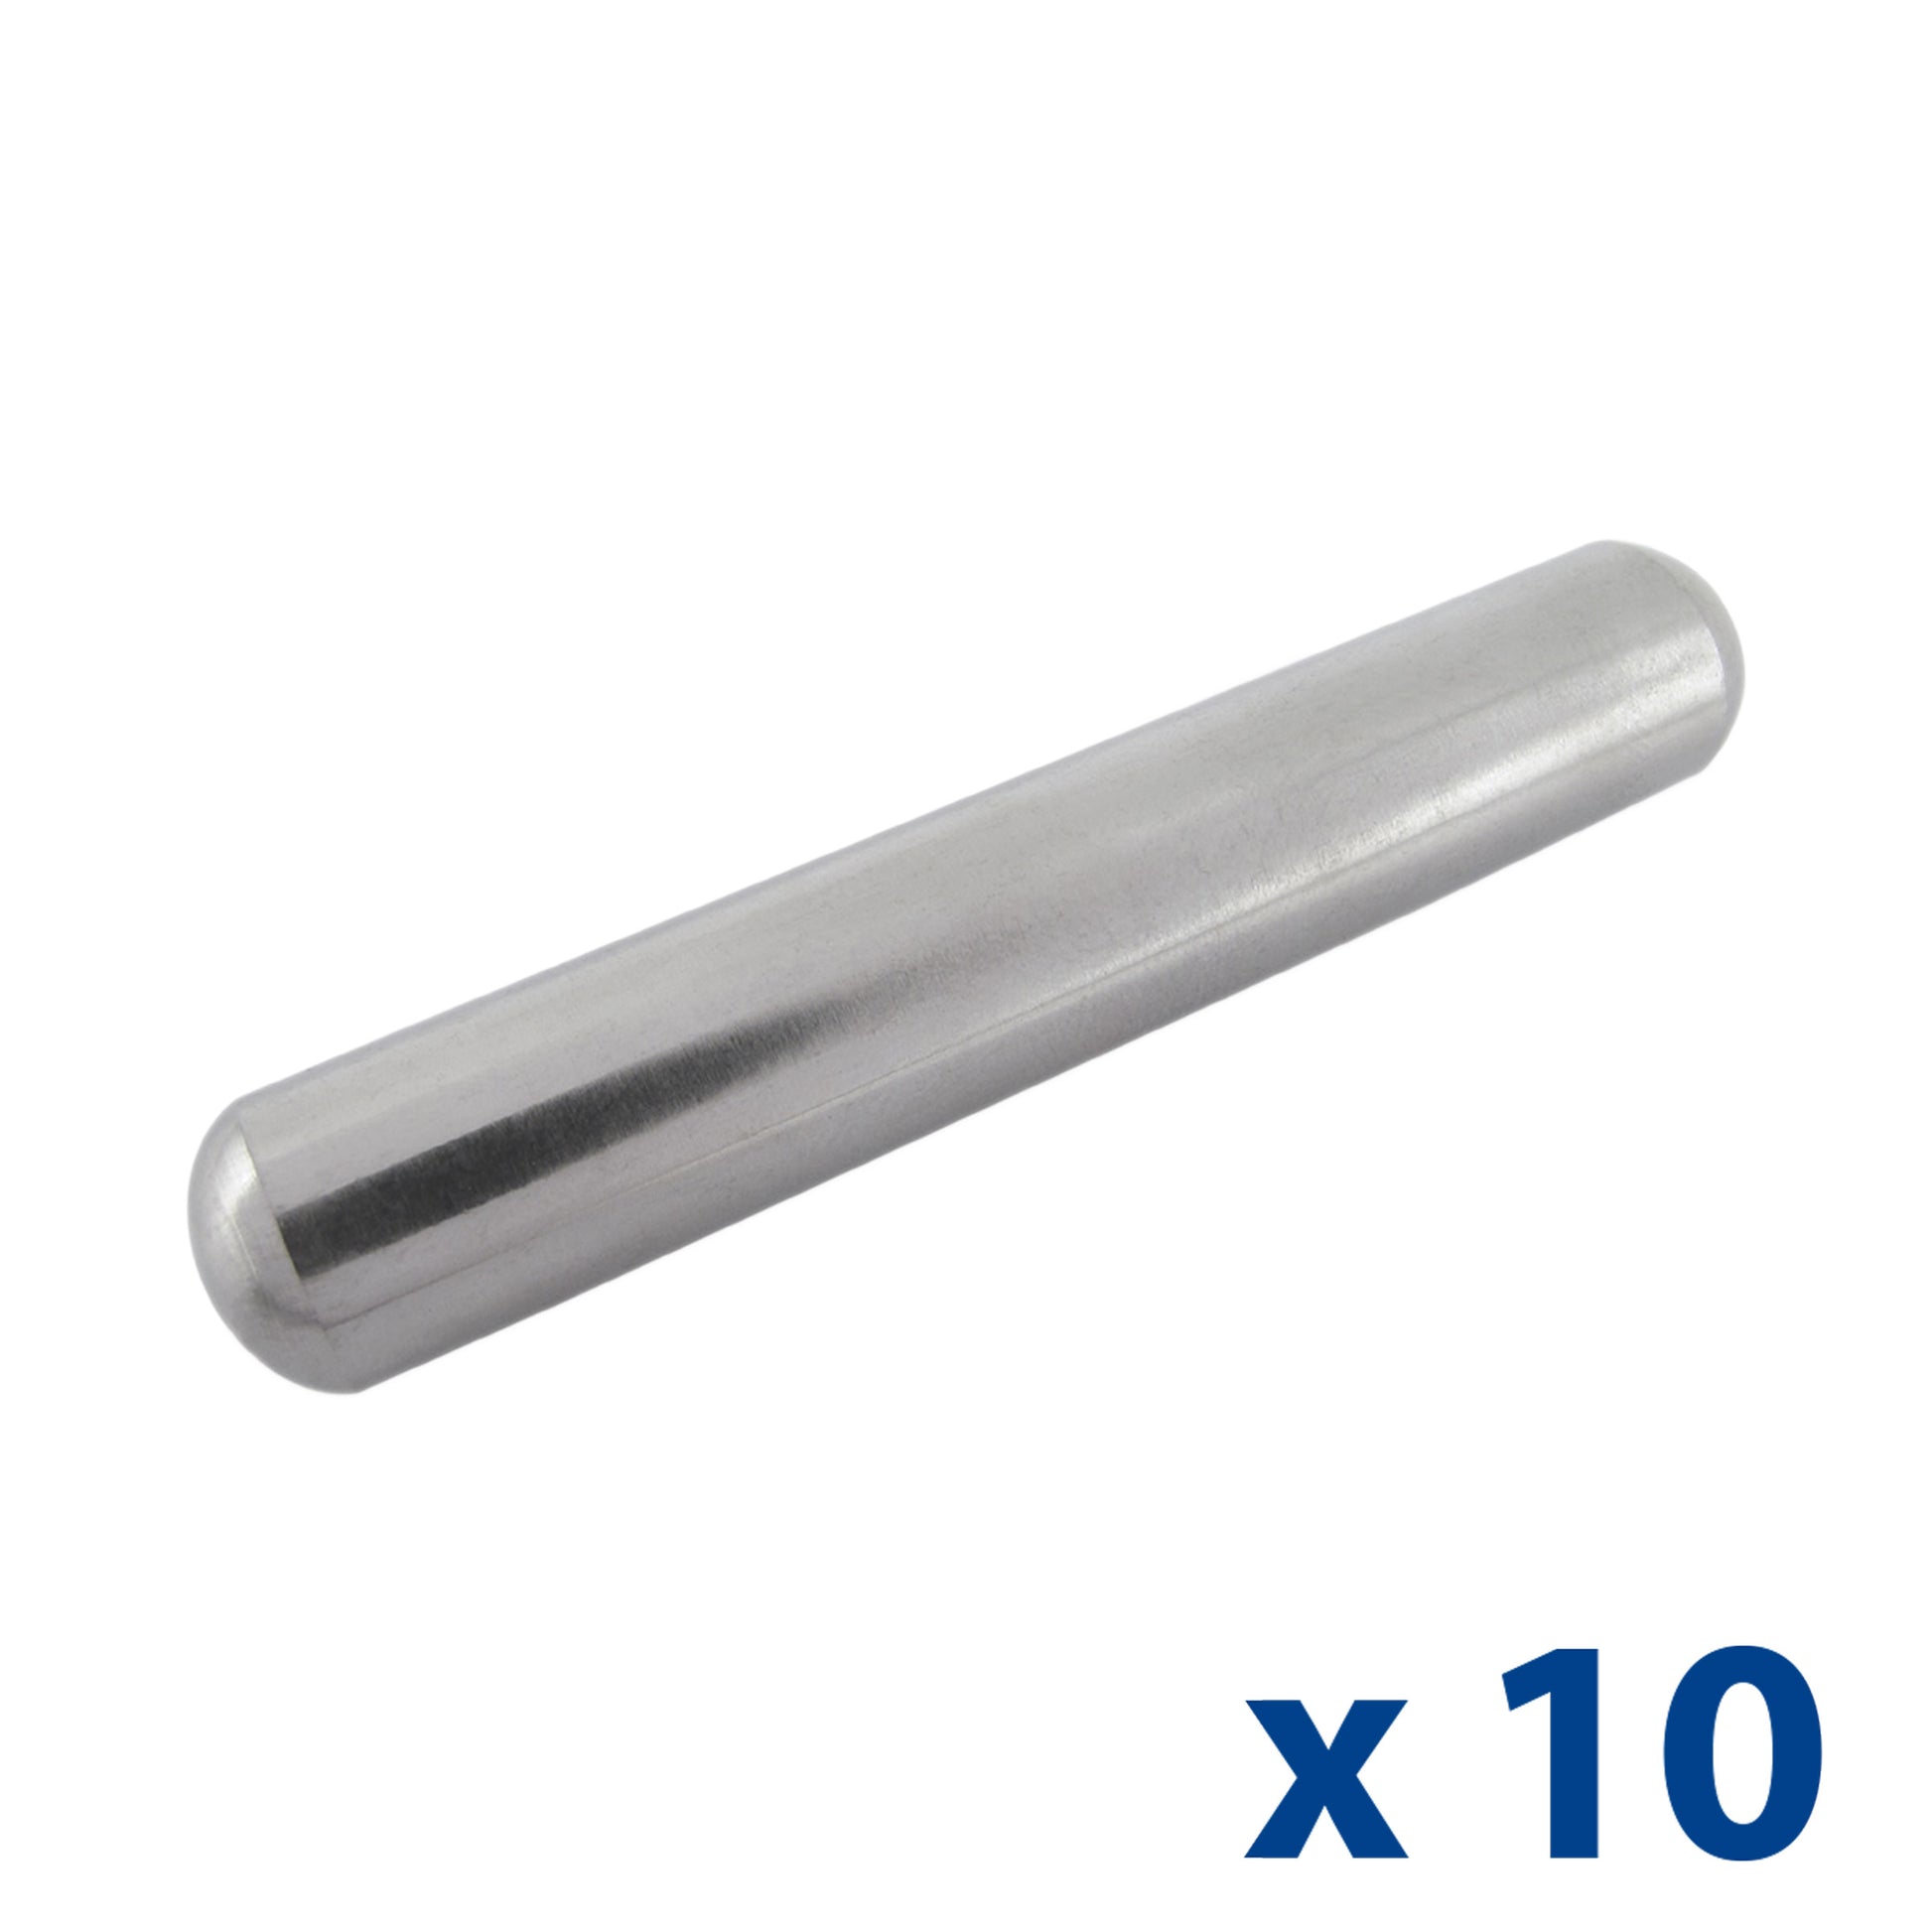 Load image into Gallery viewer, COW-CP5MAGX10 Alnico Cow Magnets (10pk) - 45 Degree Angle View x 10